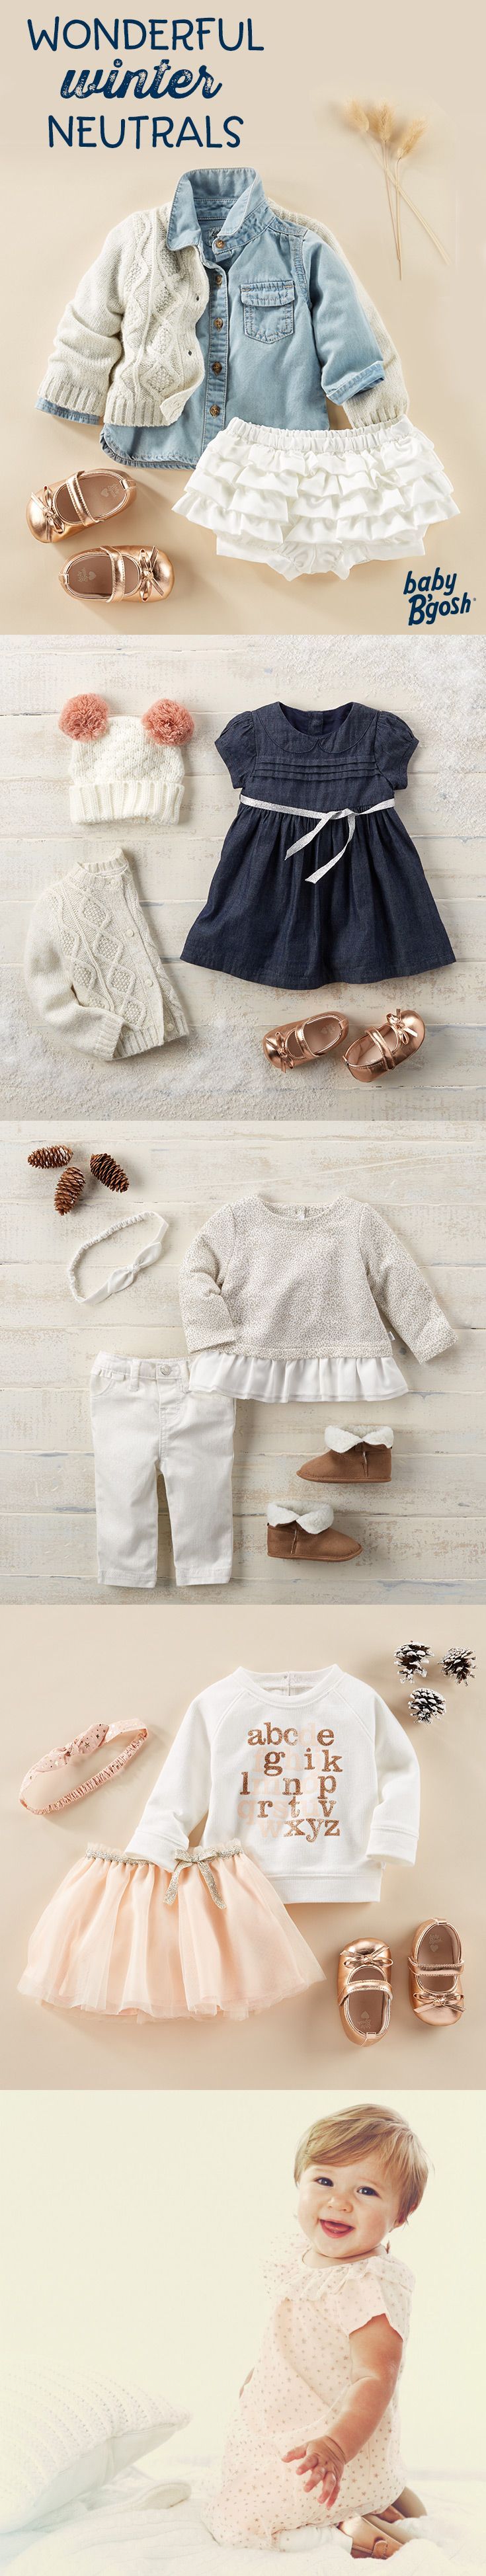 WONDERFUL WINTER NEUTRALS: A little pink and a lot of love goes into these looks from Baby B’gosh. Add a festive touch with tiny